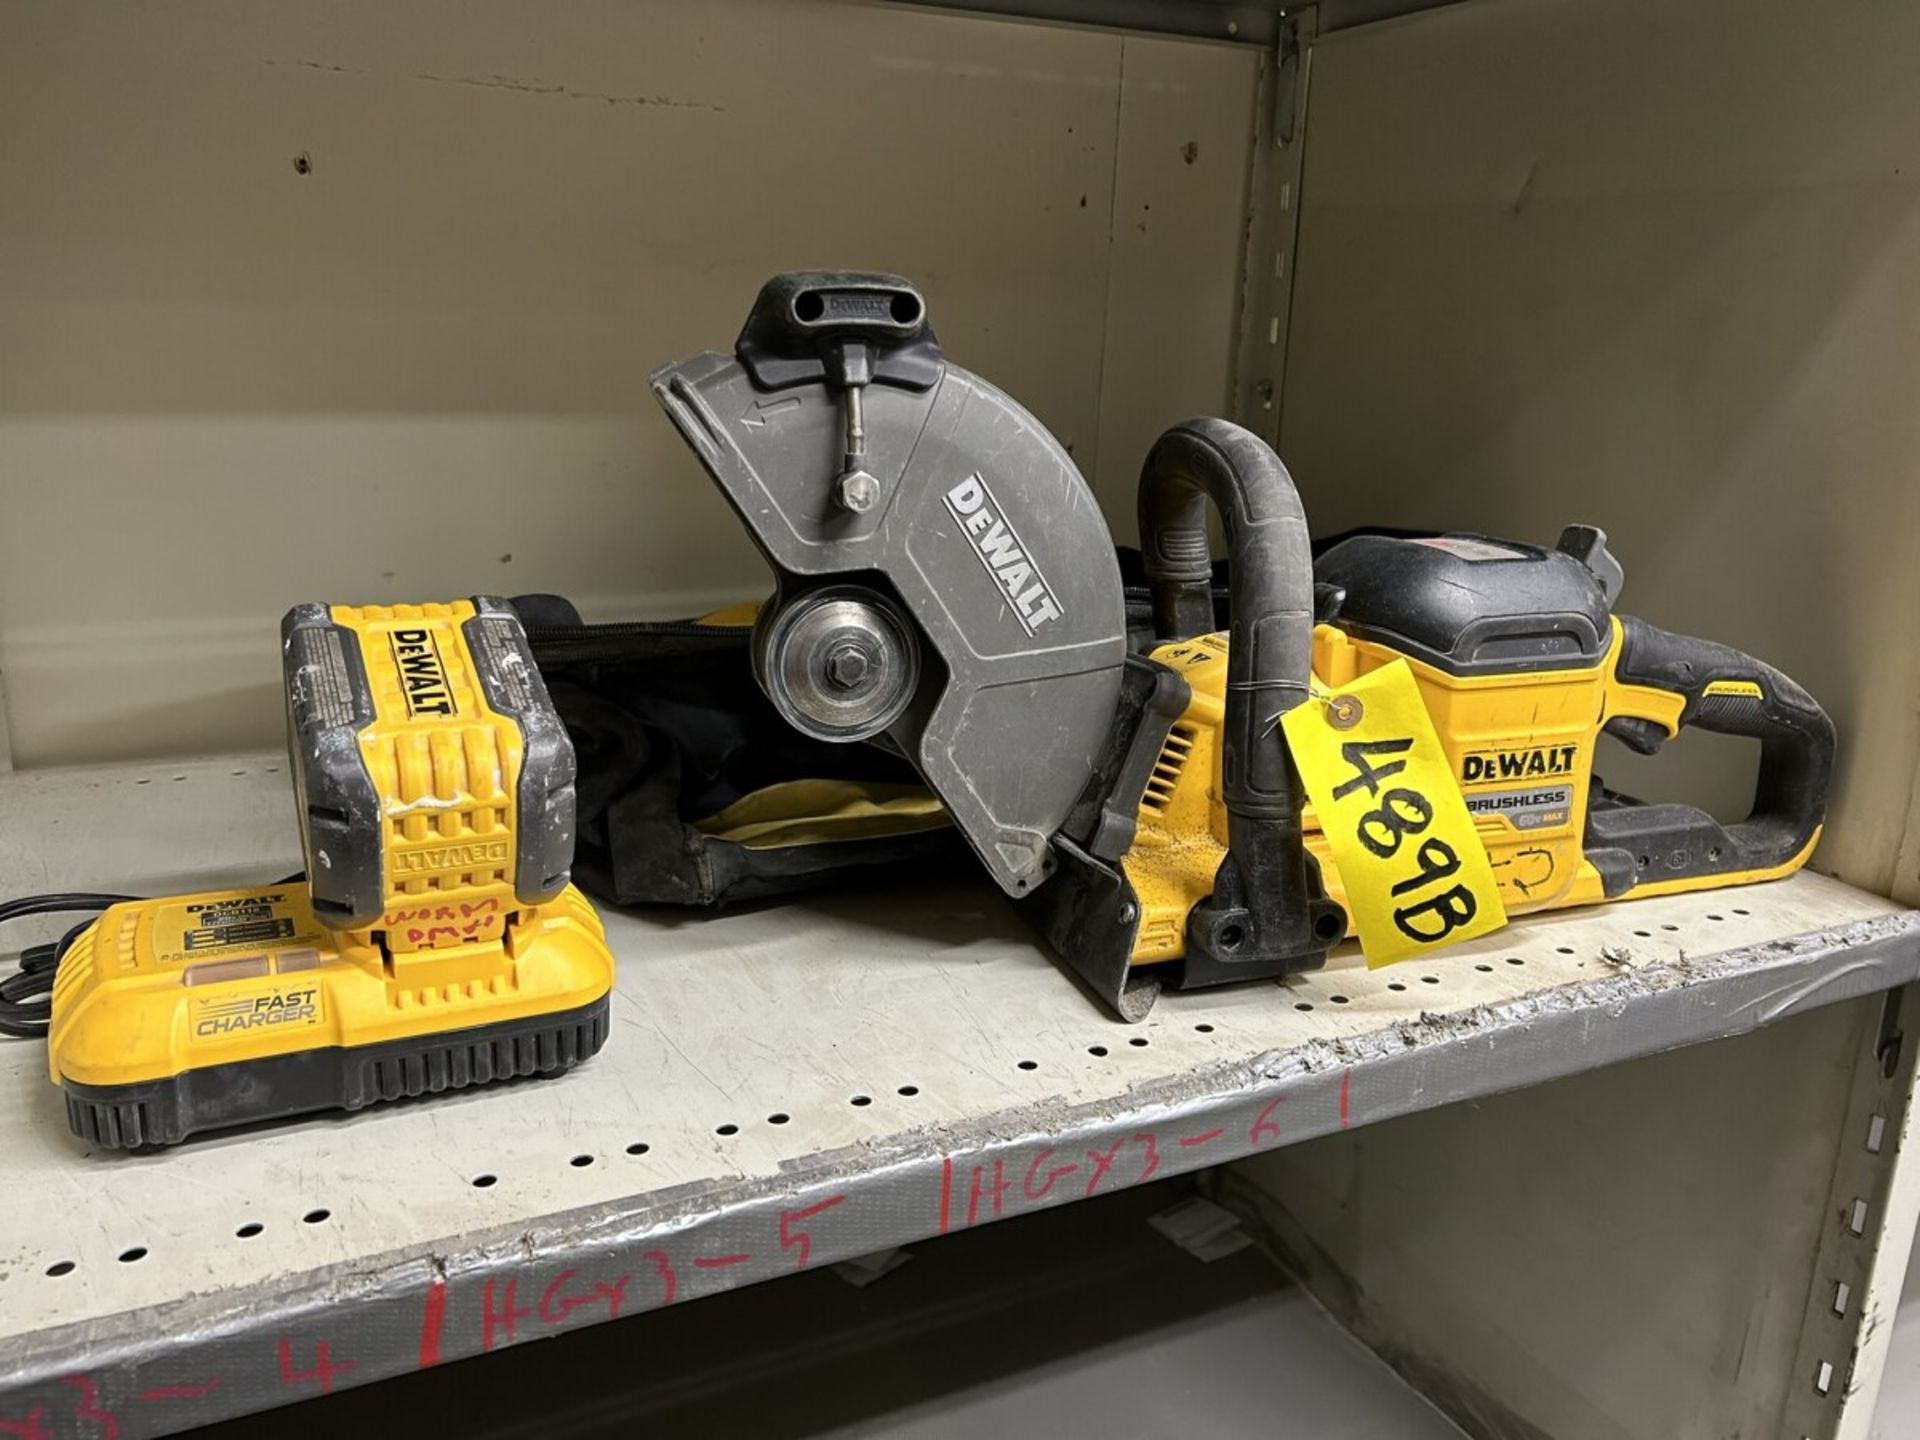 DEWALT CORDLESS 9" DEMOLITION SAW W/ 9.0AH BATTERY, CHARGER AND ASSORTED CUT OFF DISCS